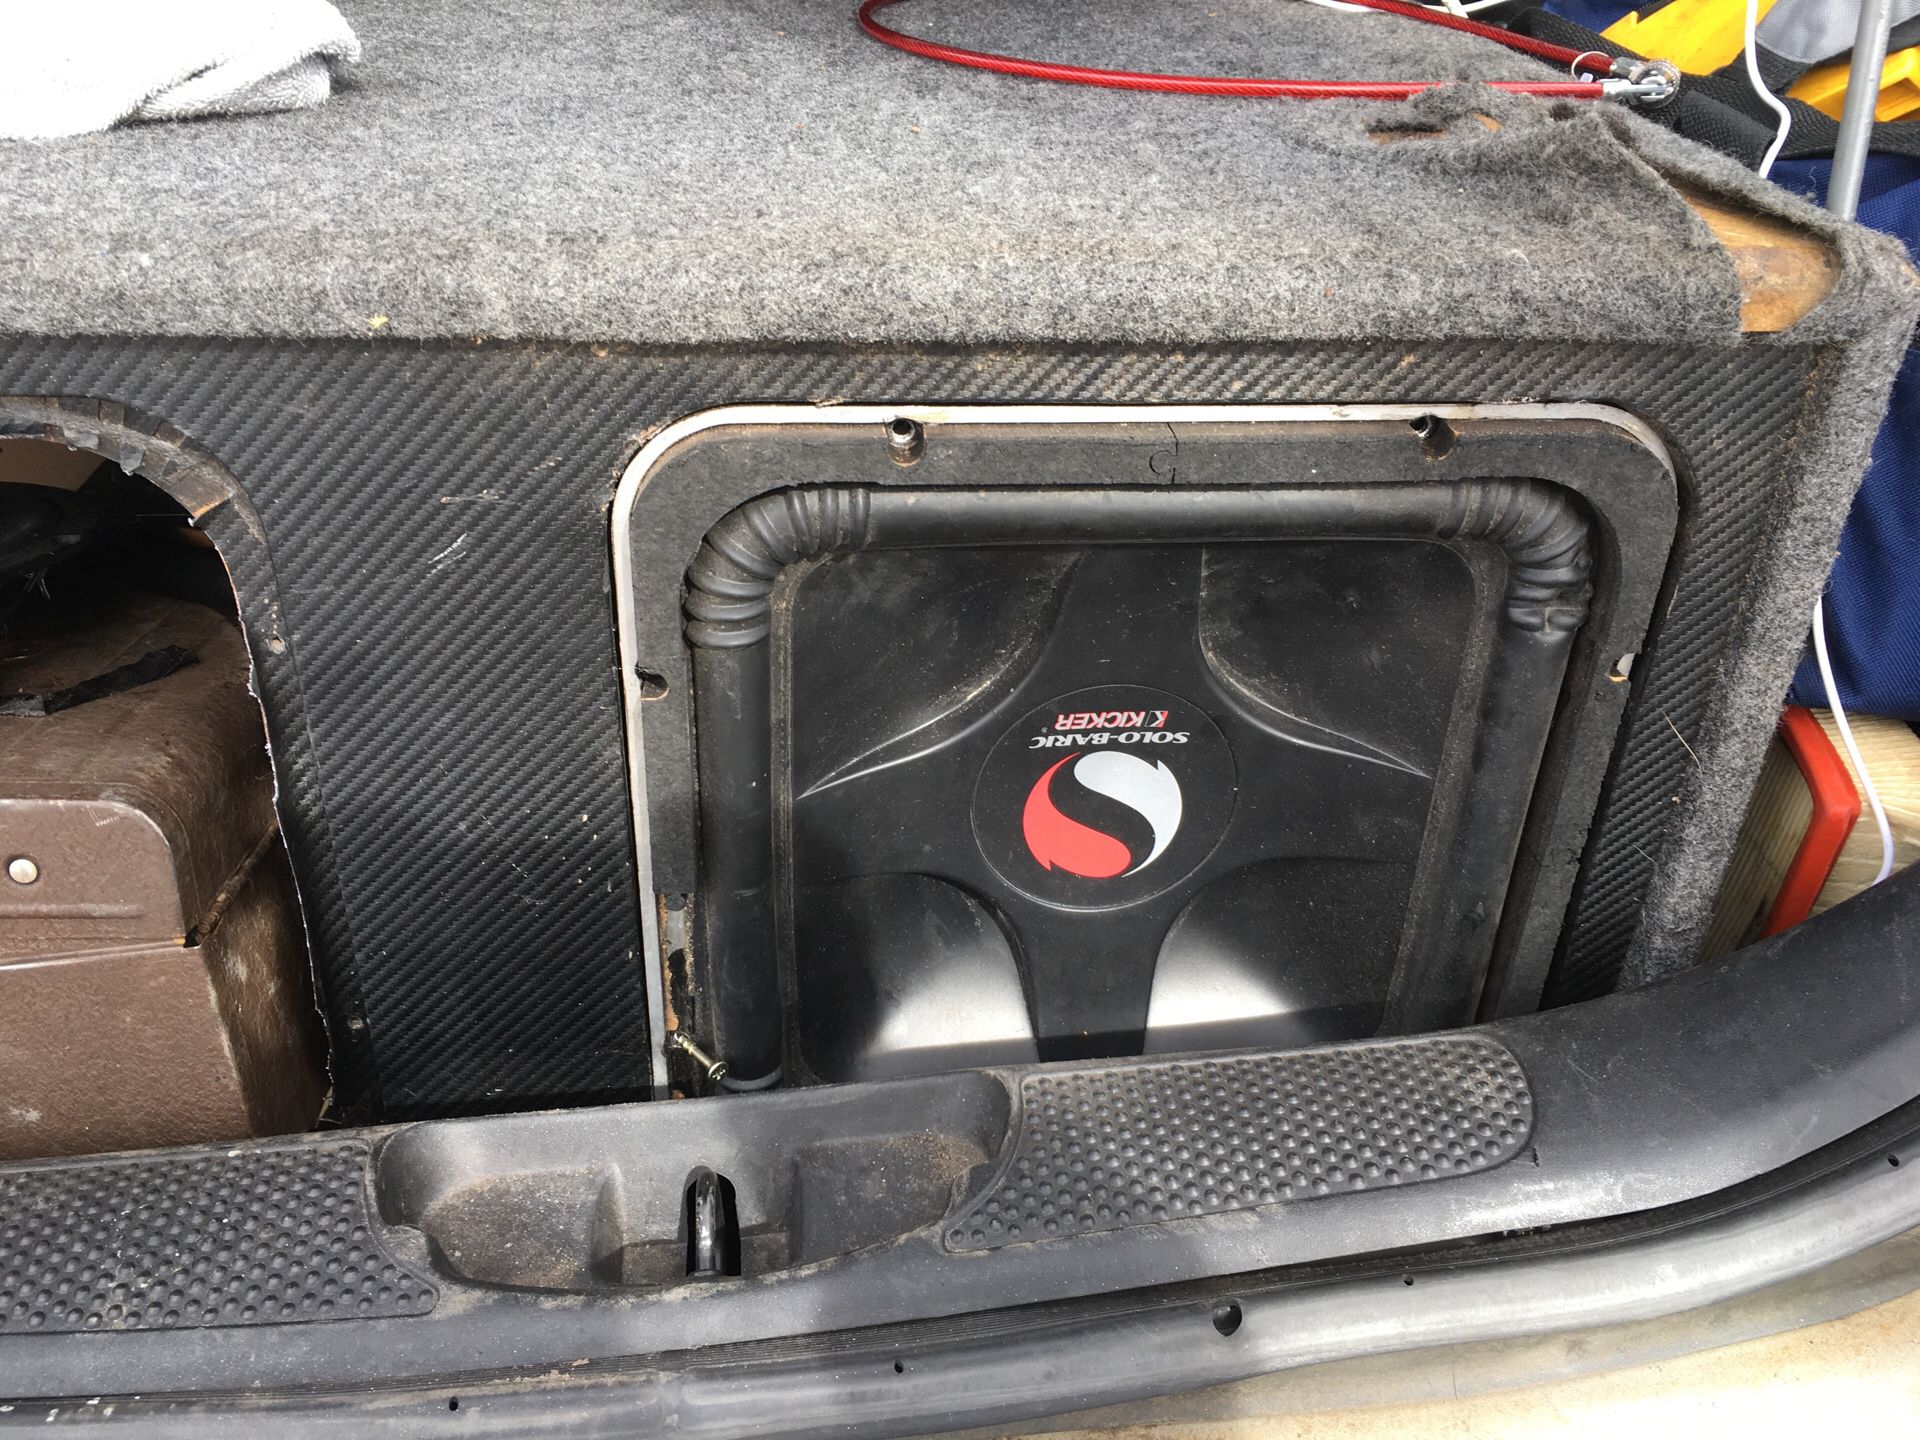 Kicker solobaric subwoofer